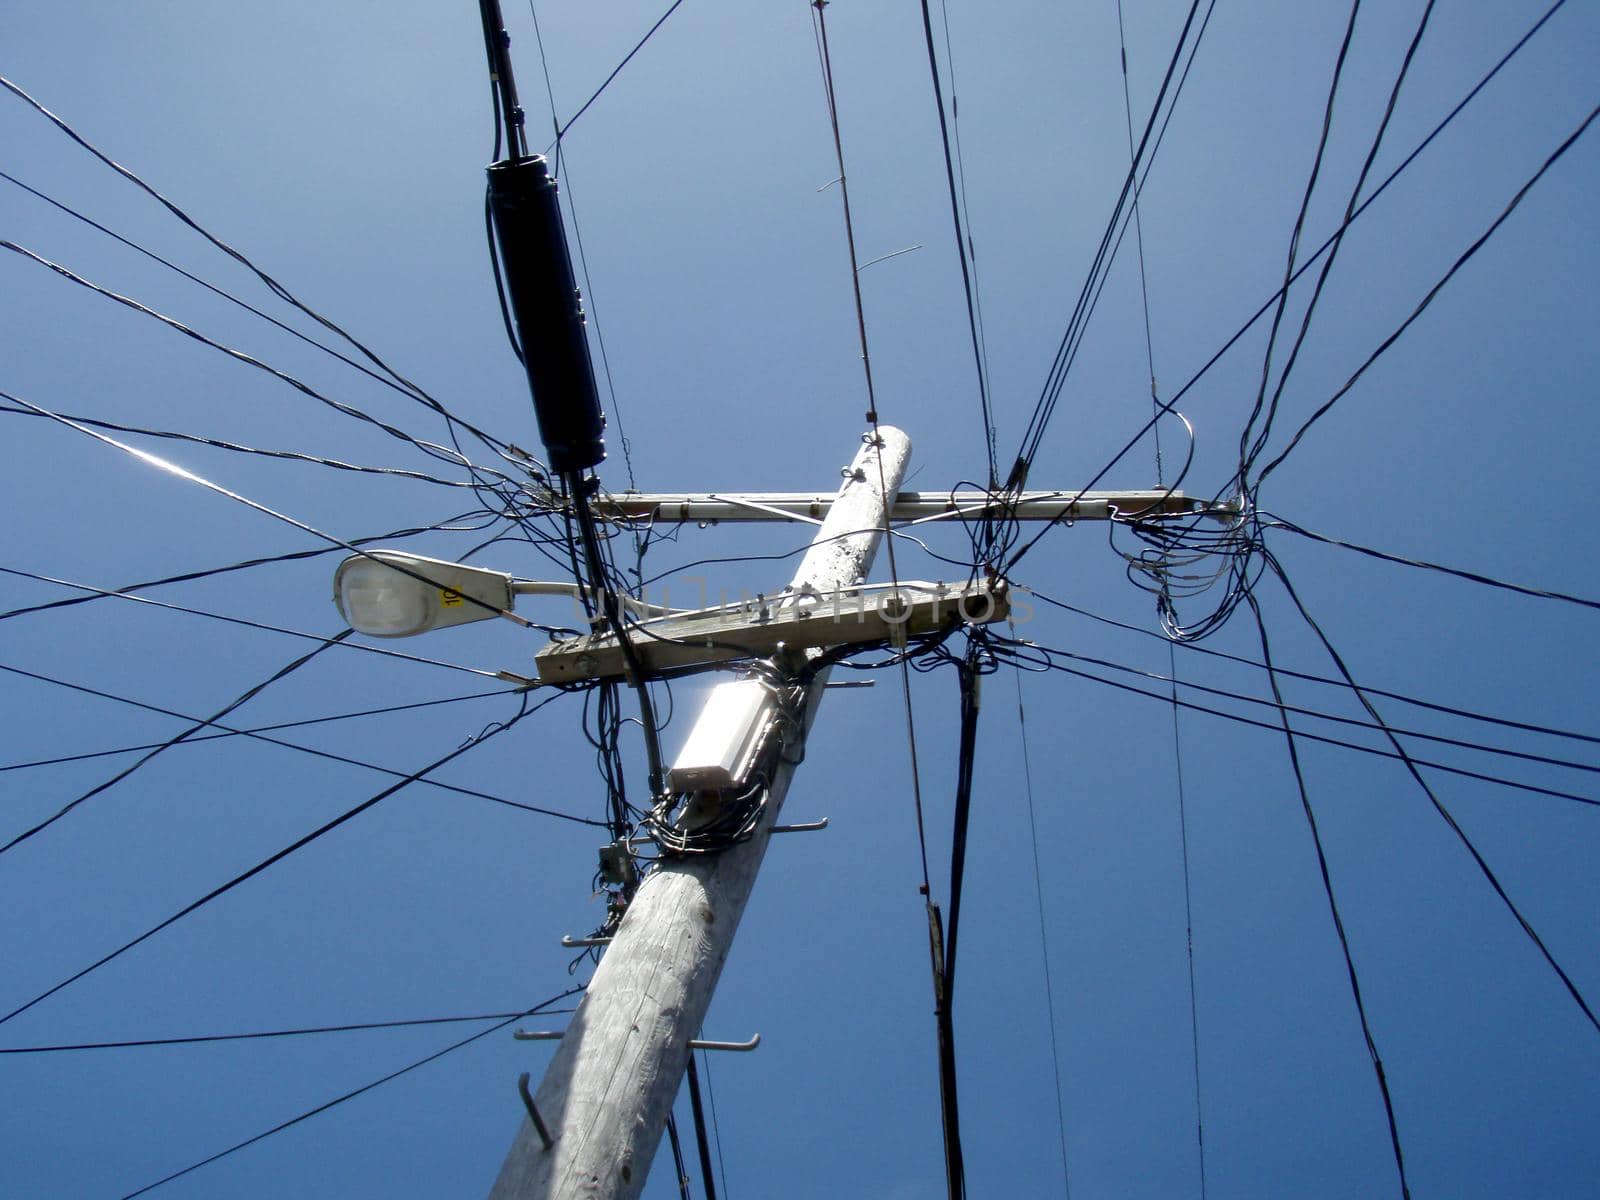 High Voltage Power Lines intersect at a wooden Utility pole in San Francisco, California.